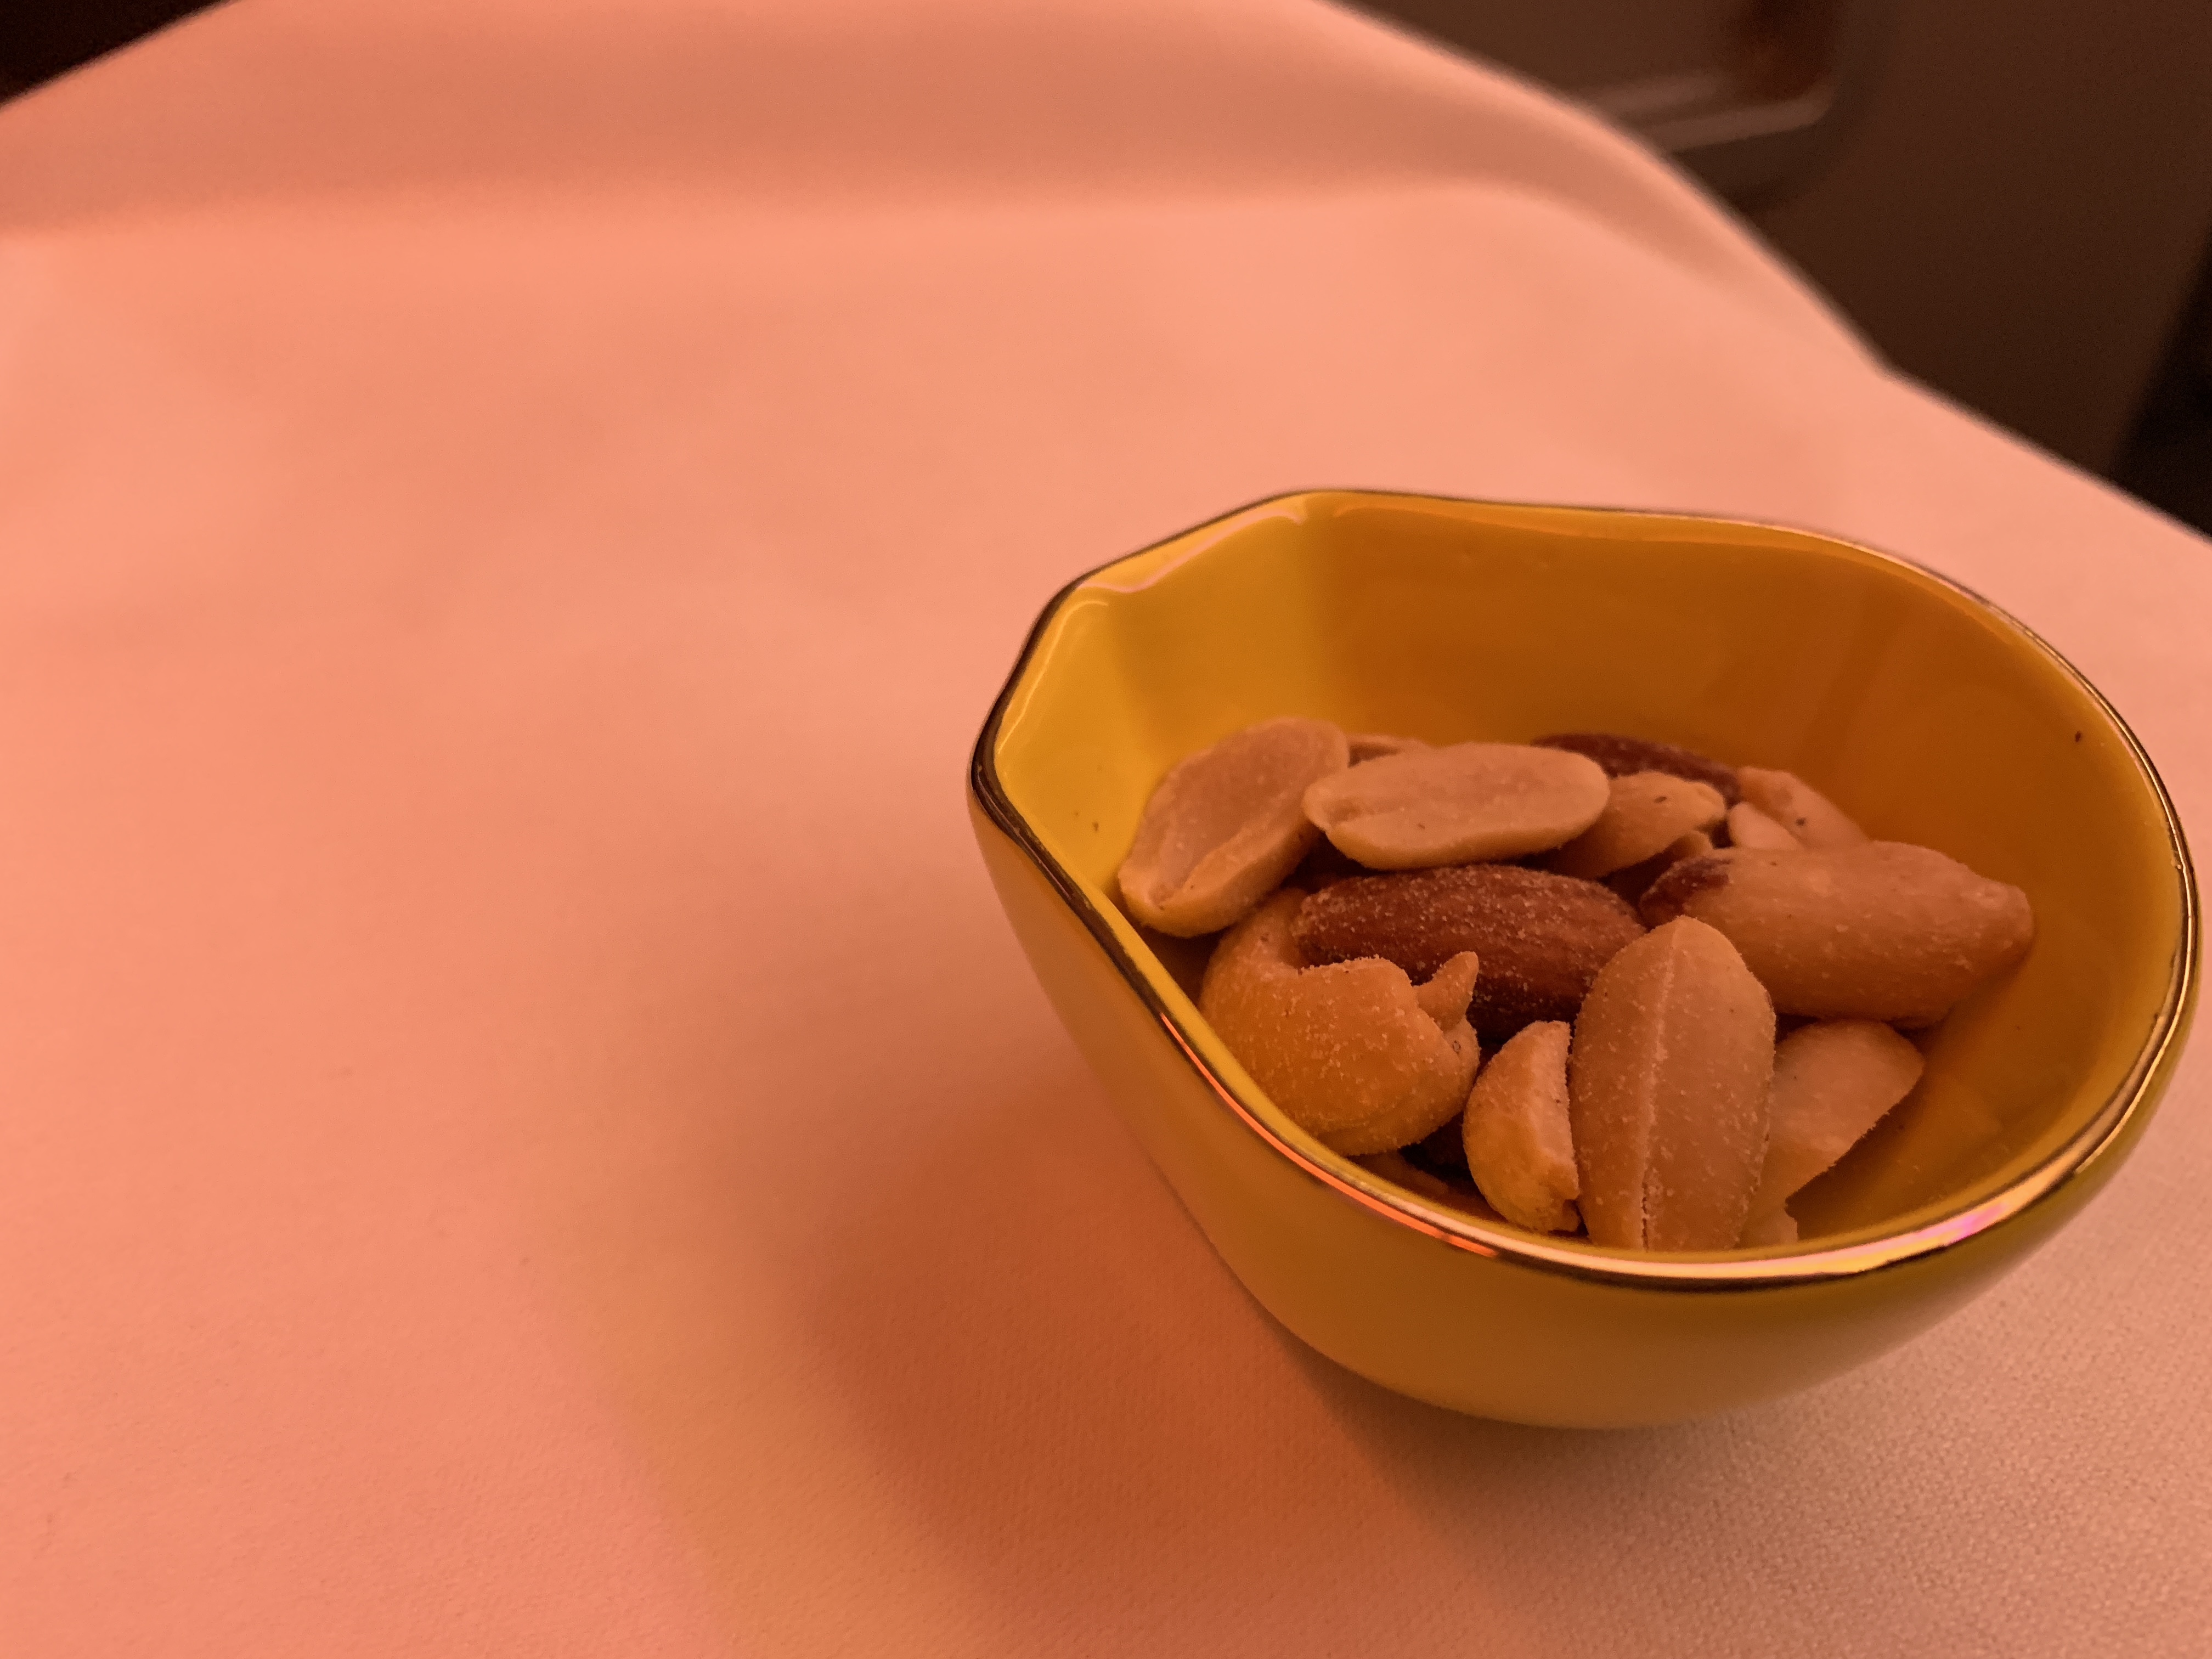 a bowl of nuts on a white surface